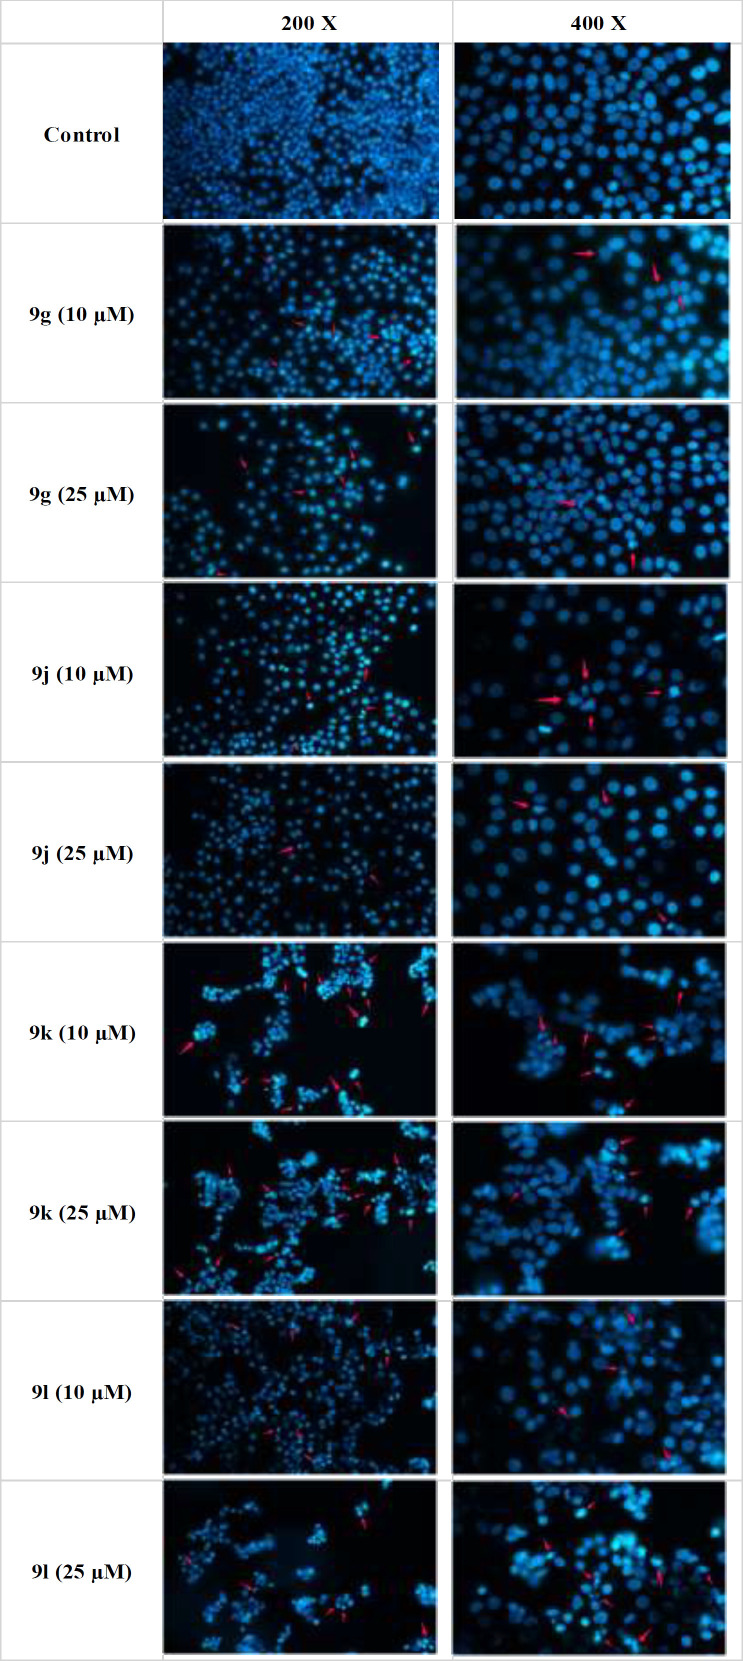 Detection of apoptosis in MCF-7 cells by Hoechst staining. Hoechst 33258 was used as a DNA stain to detect apoptosis in MCF-7 cells treated with synthesized compounds. The cells were seeded in a 6-well plates and treated with different concentrations of test compounds 9g, 9j, 9k and 9l for 72 h. After removing the whole medium, 4% cold freshly prepared paraformaldehyde (PFA) was added for 20 min at room temperature, the cells were then washed twice with PBS, and incubated with Hoechst 33258 2.5 µg/mL for 30 min at room temperature in the dark. Finally, the cells were washed with PBS again and the plates were imaged with a fluorescence microscope